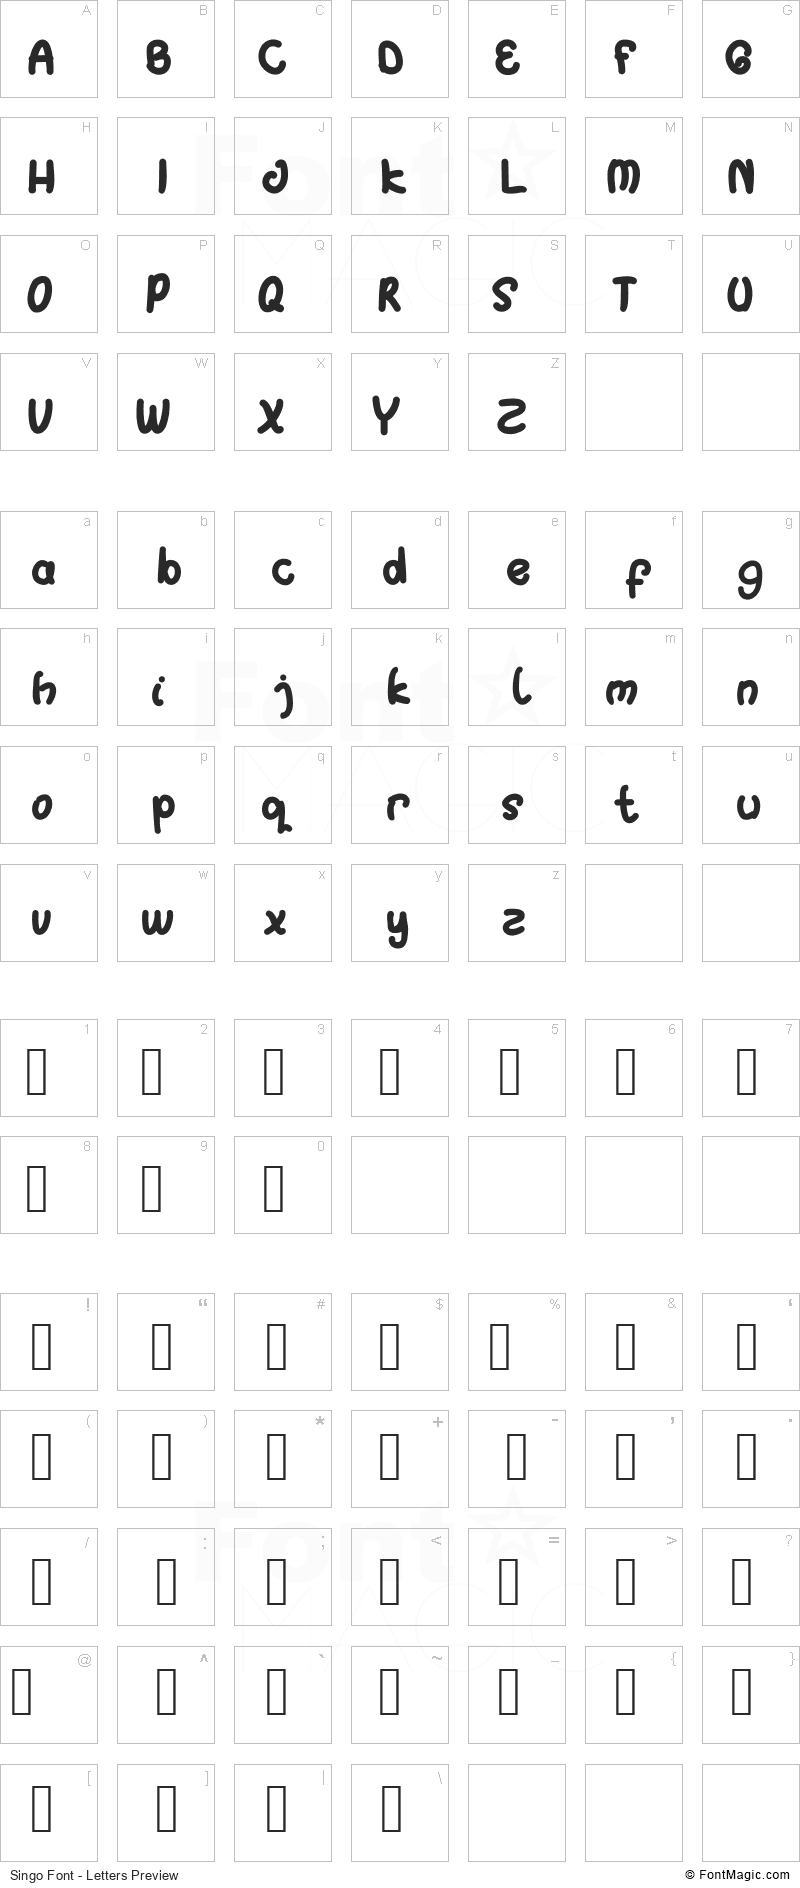 Singo Font - All Latters Preview Chart